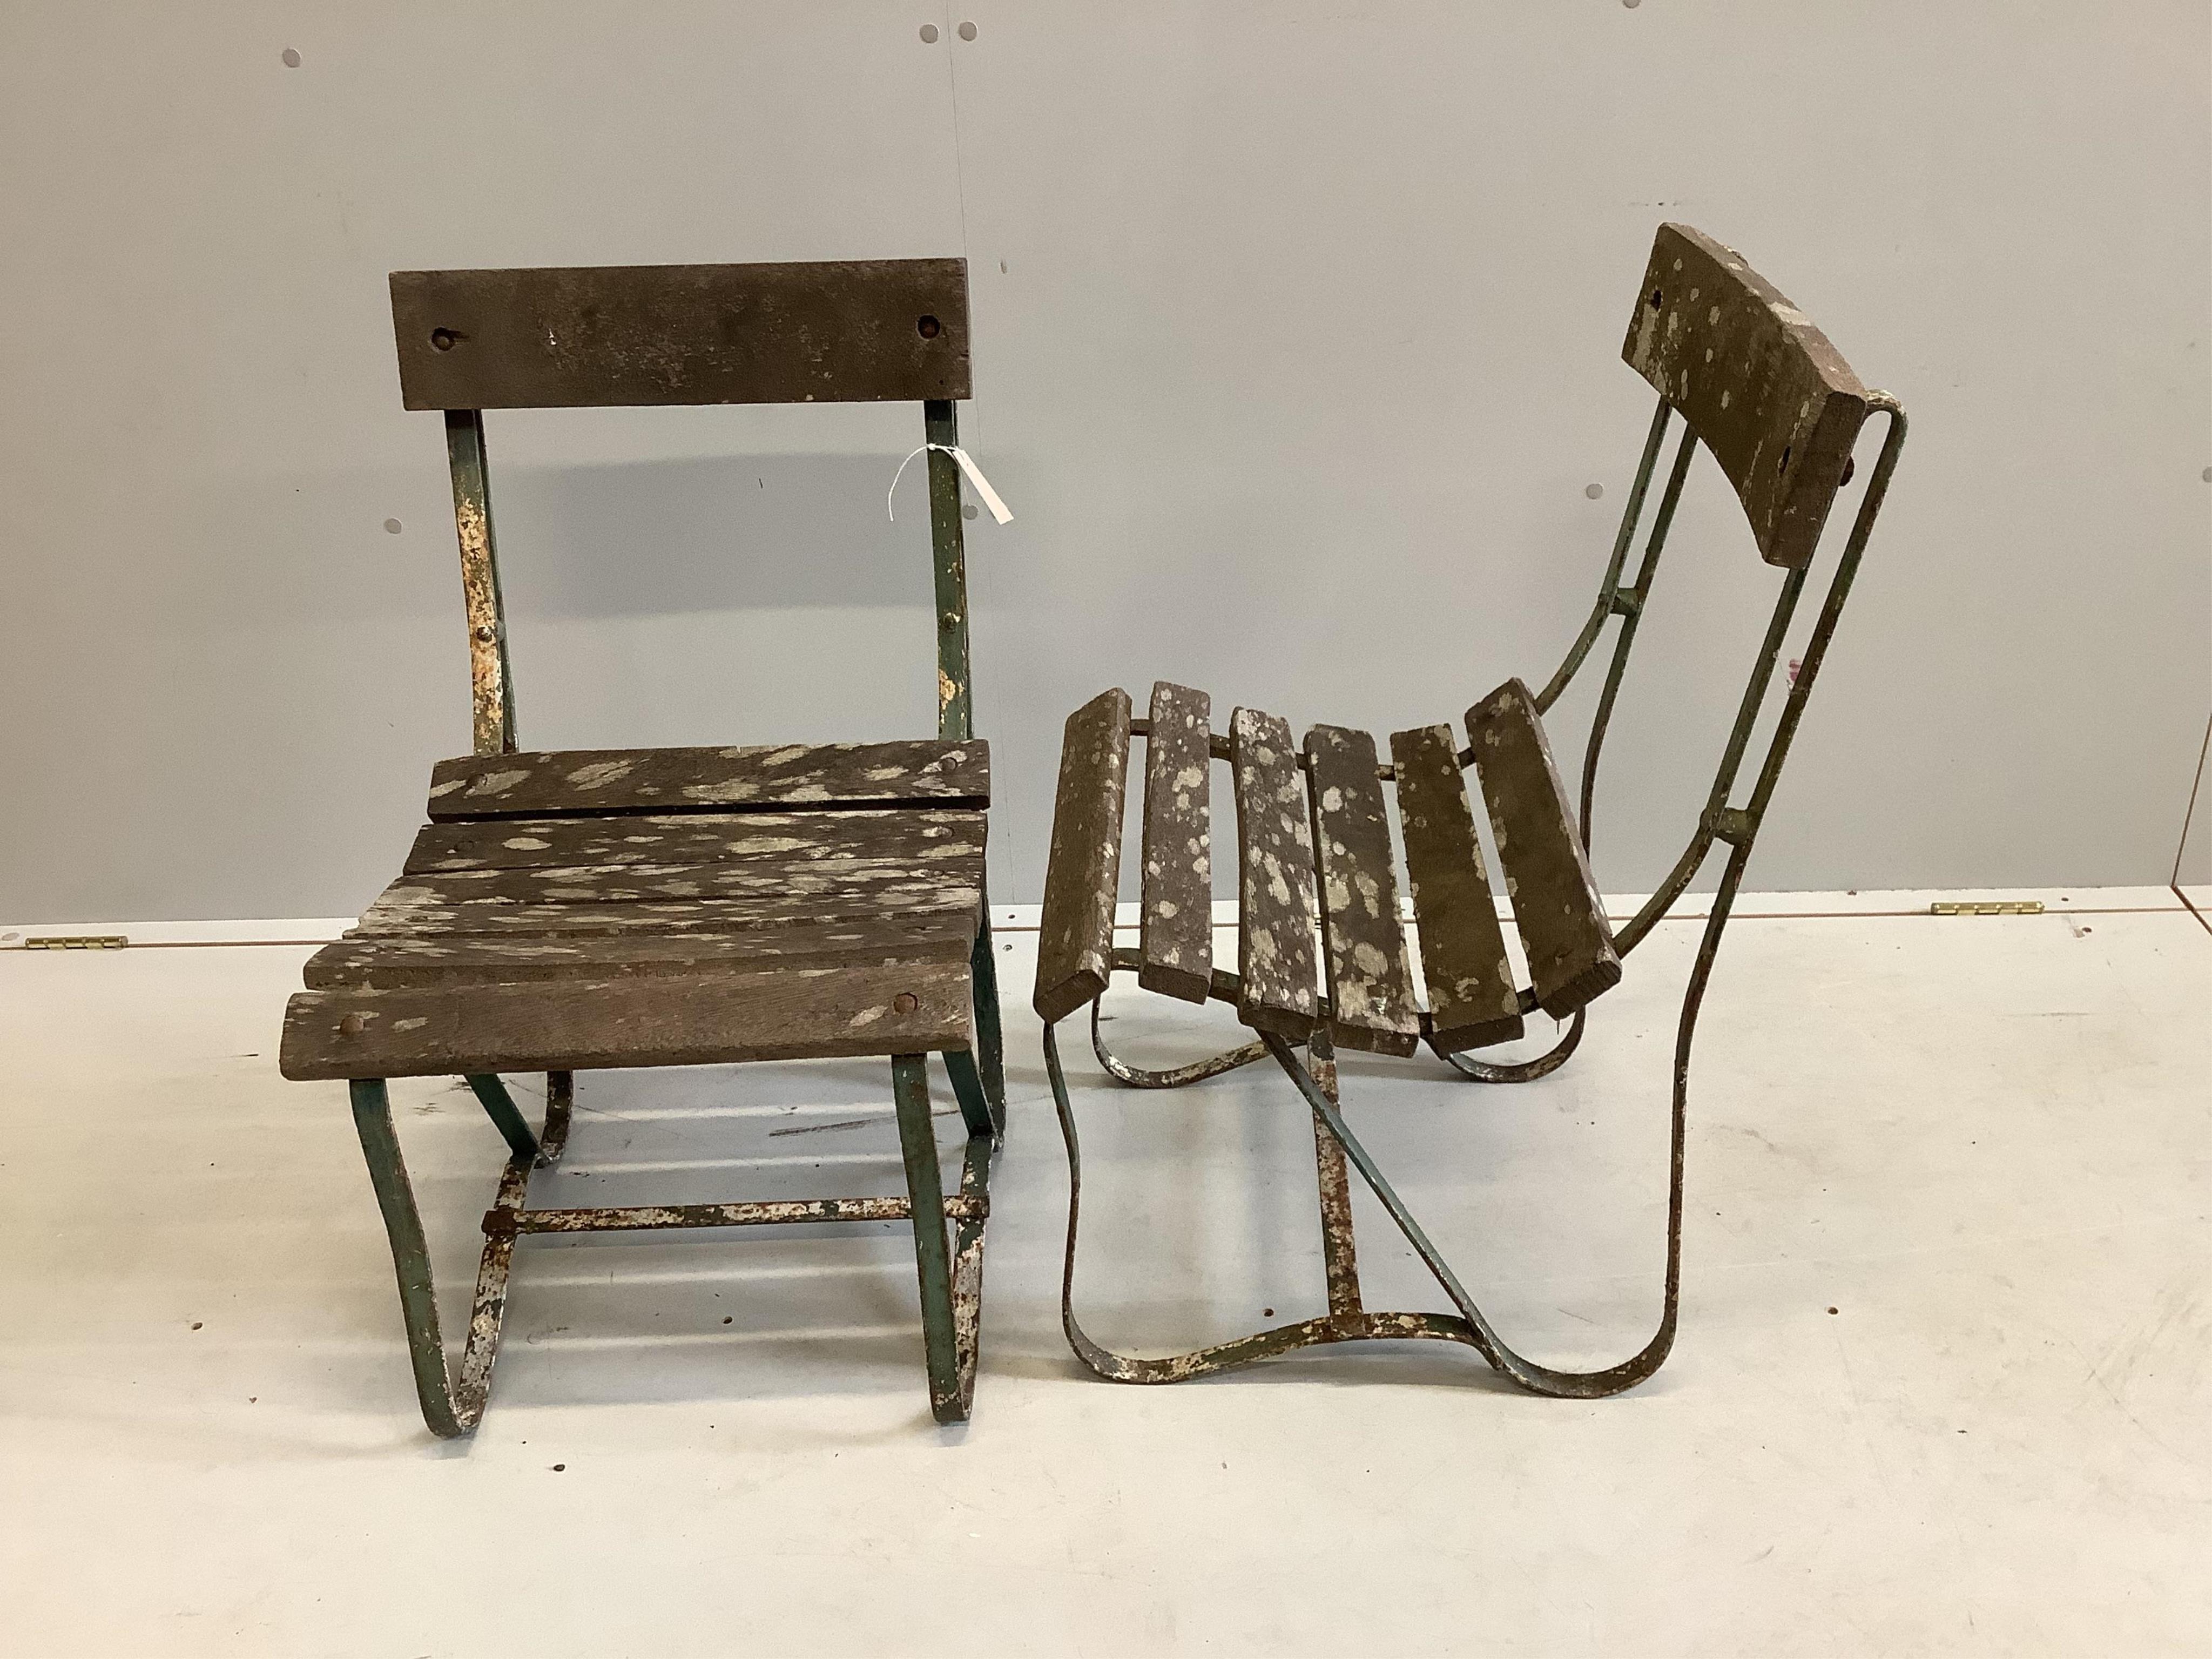 A pair of vintage slatted wrought iron garden chairs, width 45cm, depth 45cm, height 76cm. Condition - fair